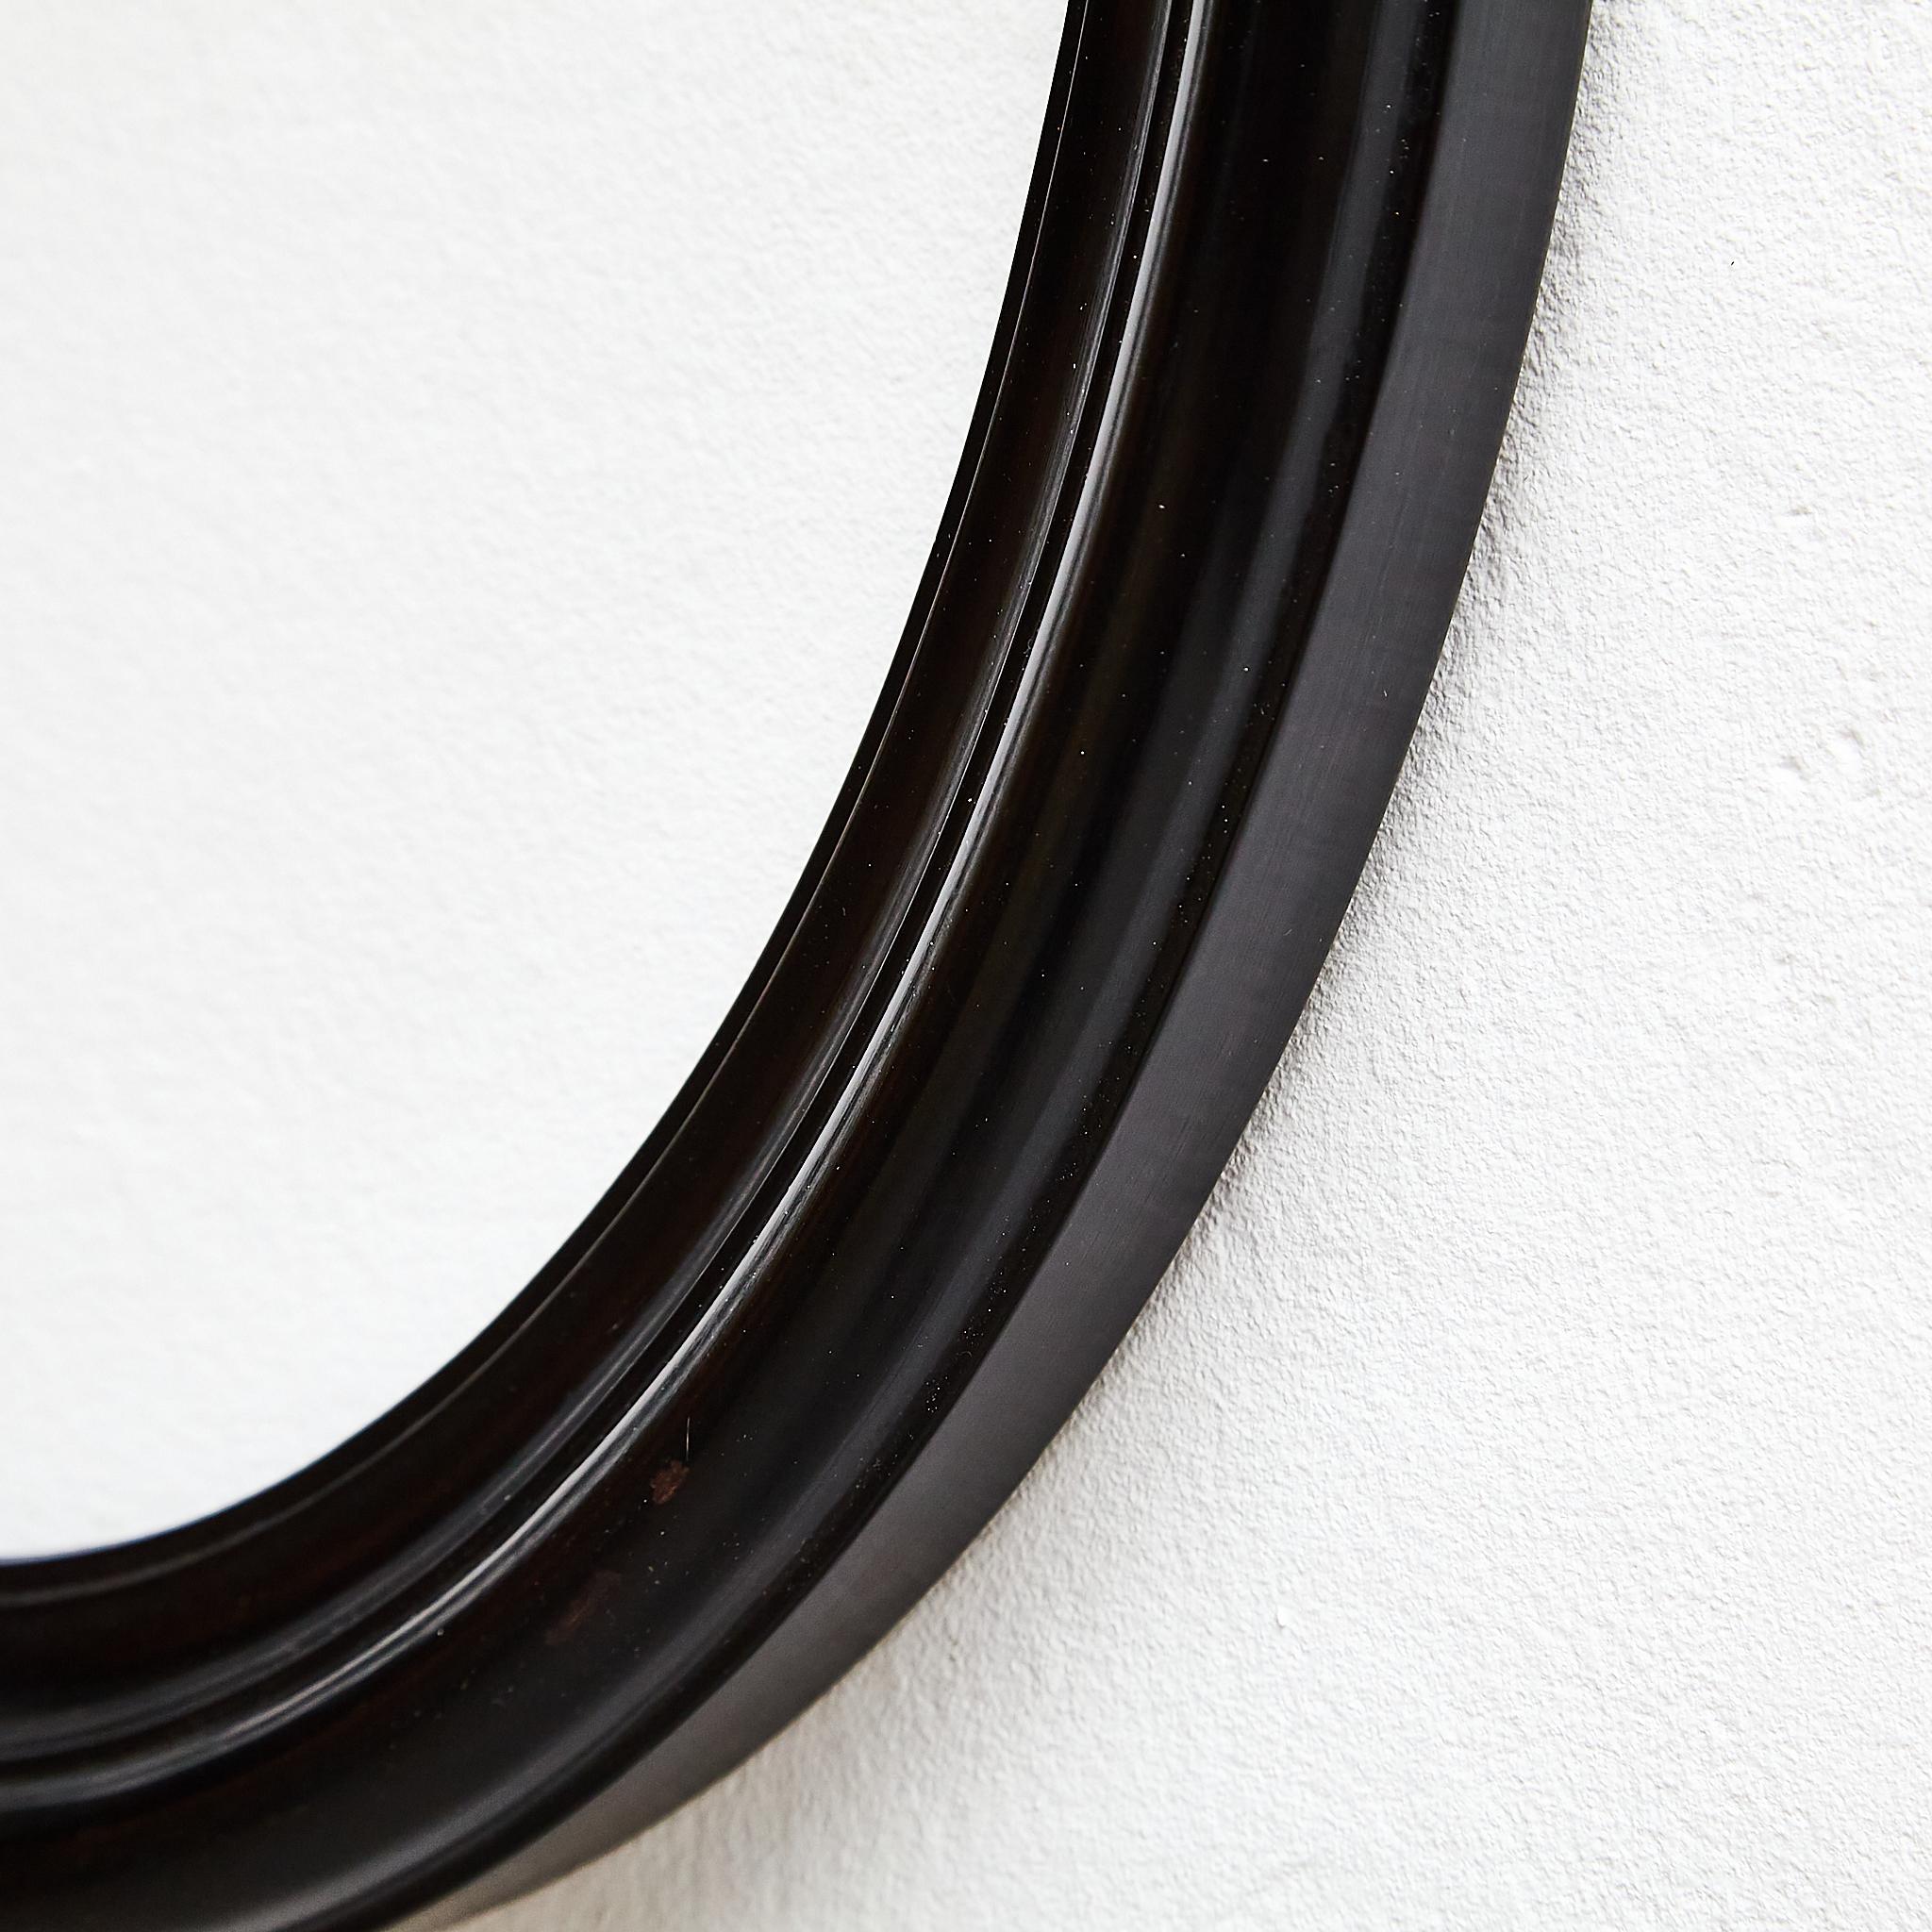 Lacquered Antique Black Oval Wood Laquered Frame, circa 1950